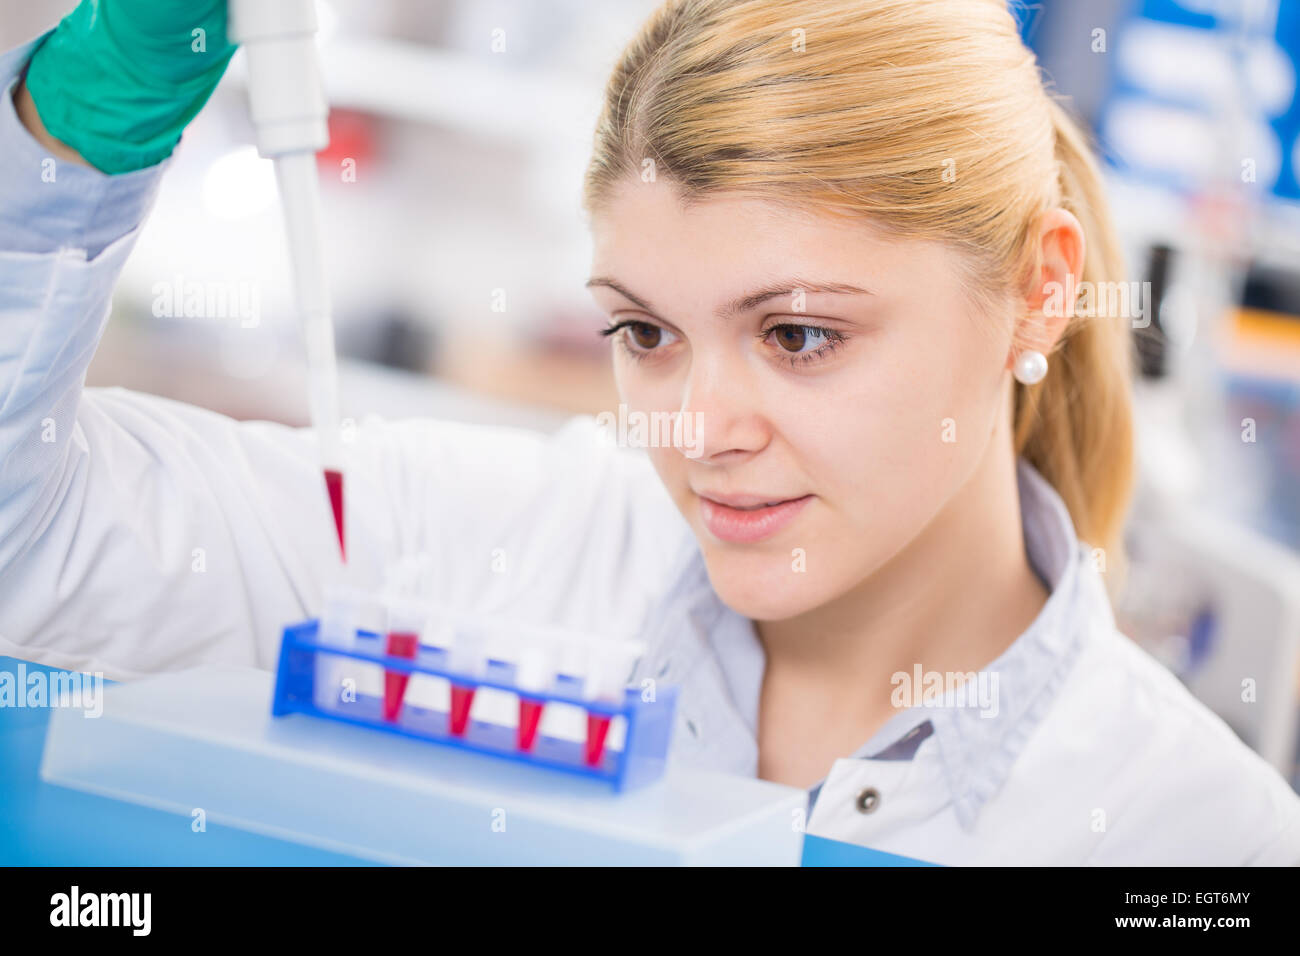 young women science professional pipetting solution into the glass test tube. Stock Photo